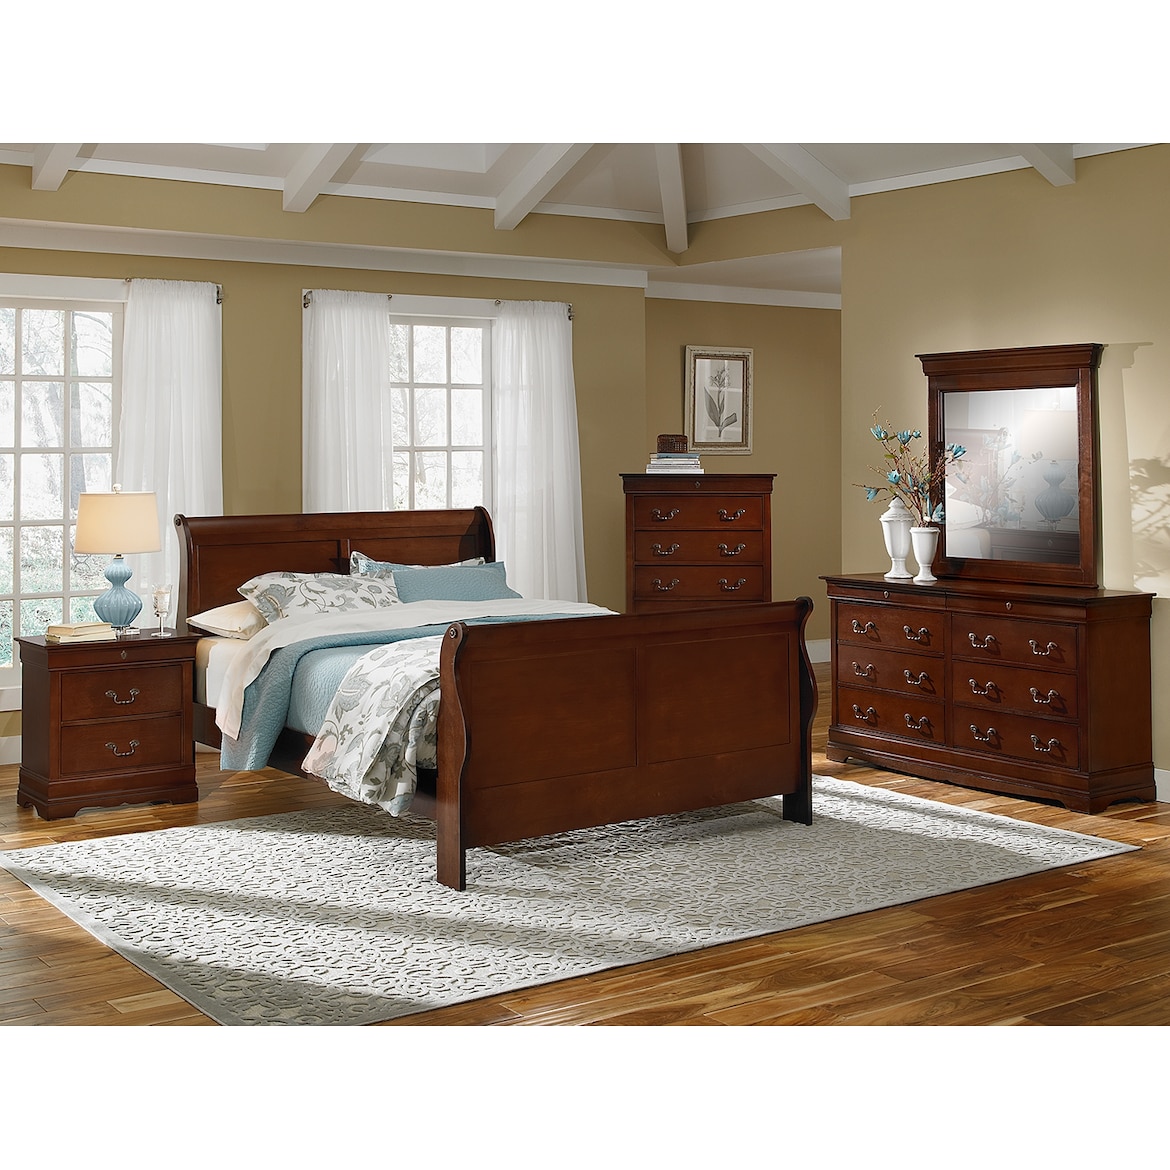 Neo Classic Bed Value City Furniture And Mattresses